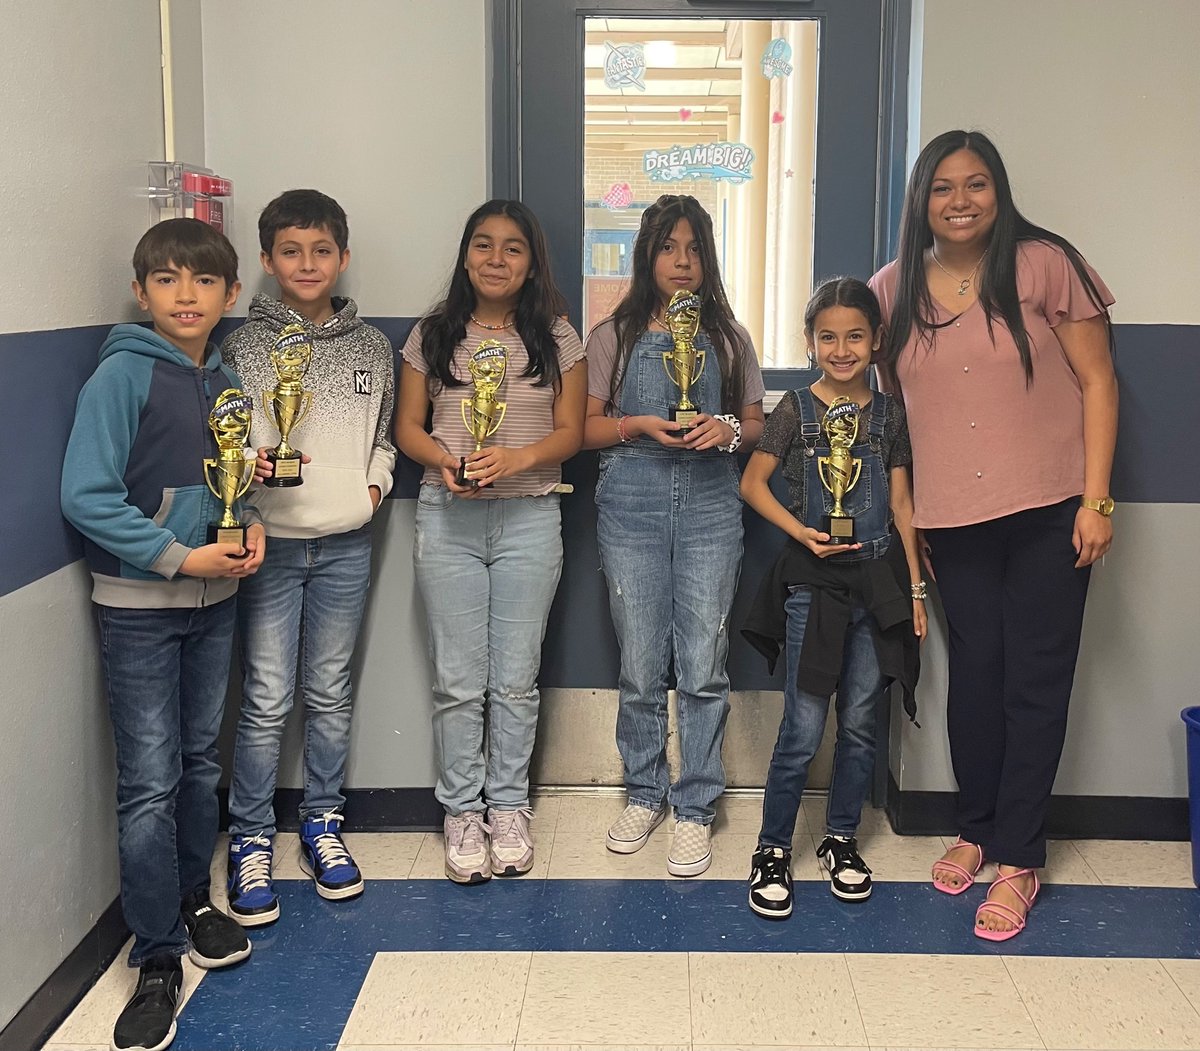 We love math! 
5 of my students were awarded First in Math Grand Champions
Also, our class is in 2nd place in the state of Texas 🏆

@NISDLeonValley @NISDElemMath @FirstInMath